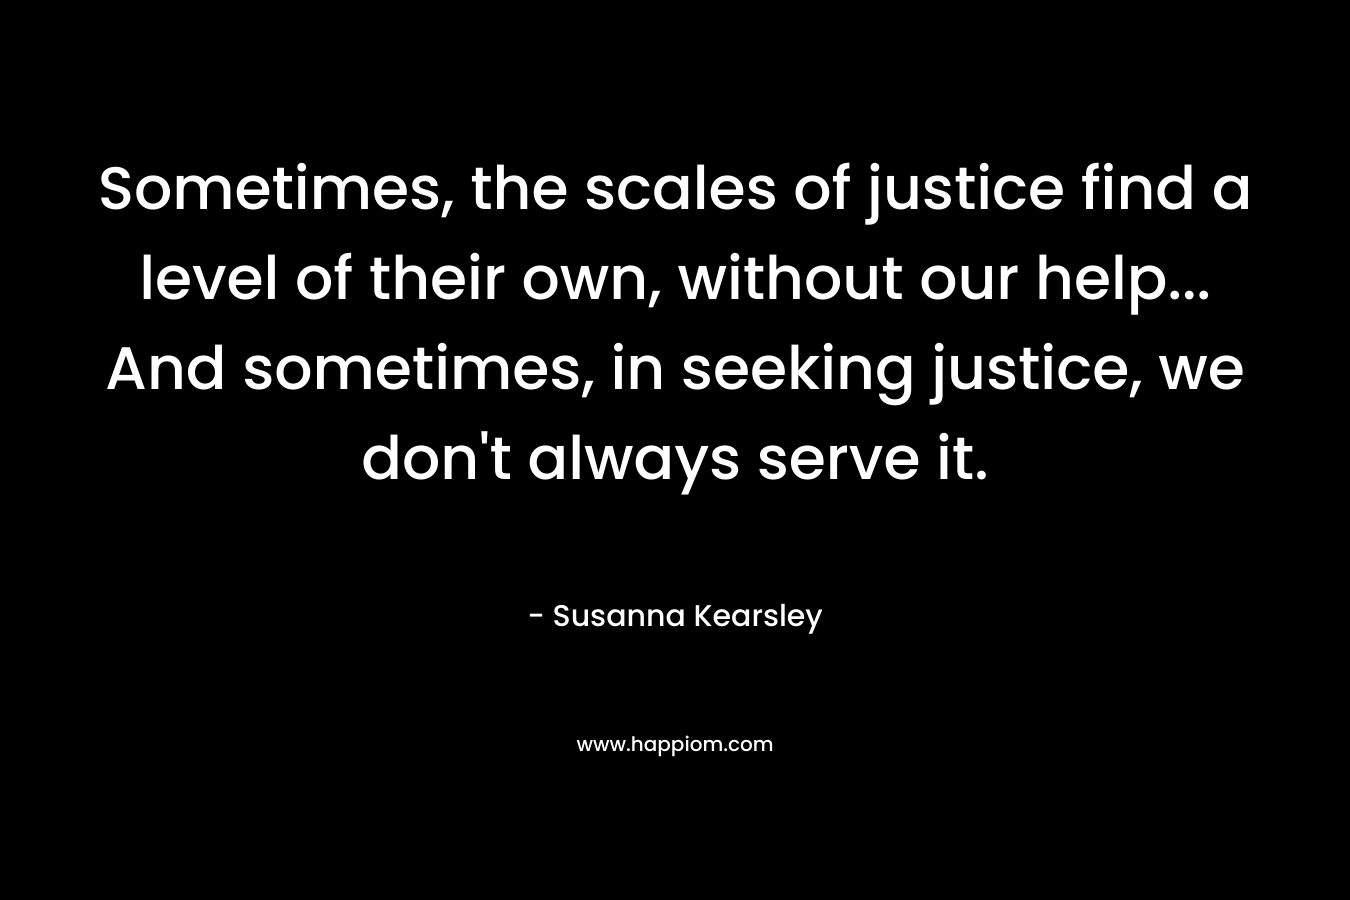 Sometimes, the scales of justice find a level of their own, without our help... And sometimes, in seeking justice, we don't always serve it.